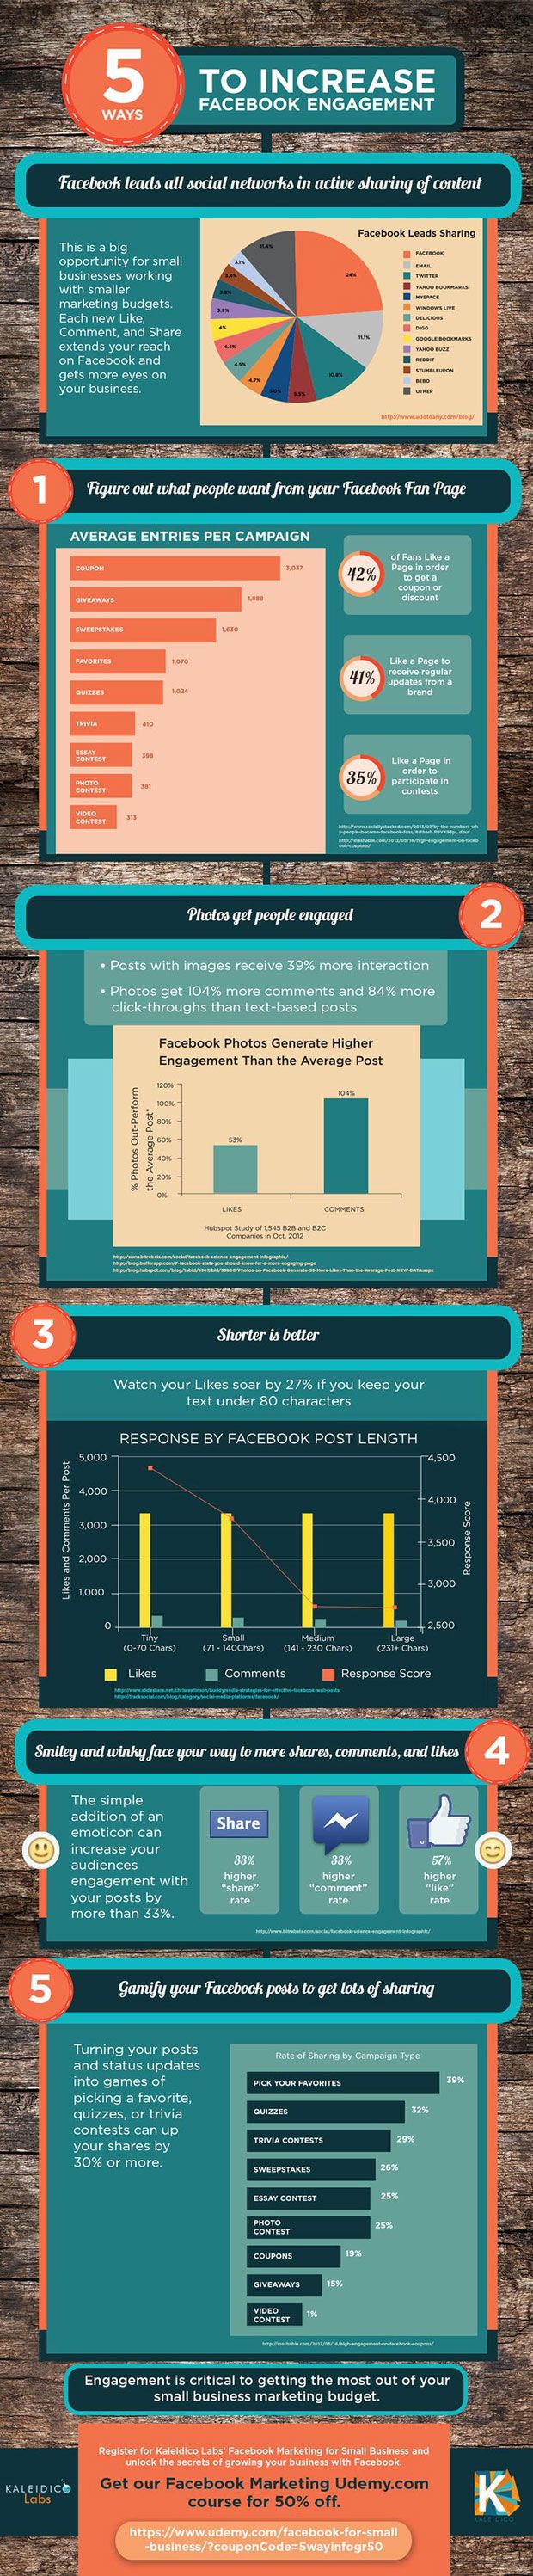 Marketing-Infographic-Infographic-5-Ways-to-Increase-Facebook-Engagement.-Facebook-leads-all-socia Marketing Infographic : #Infographic: 5 Ways to Increase #Facebook #Engagement. Facebook leads all socia...